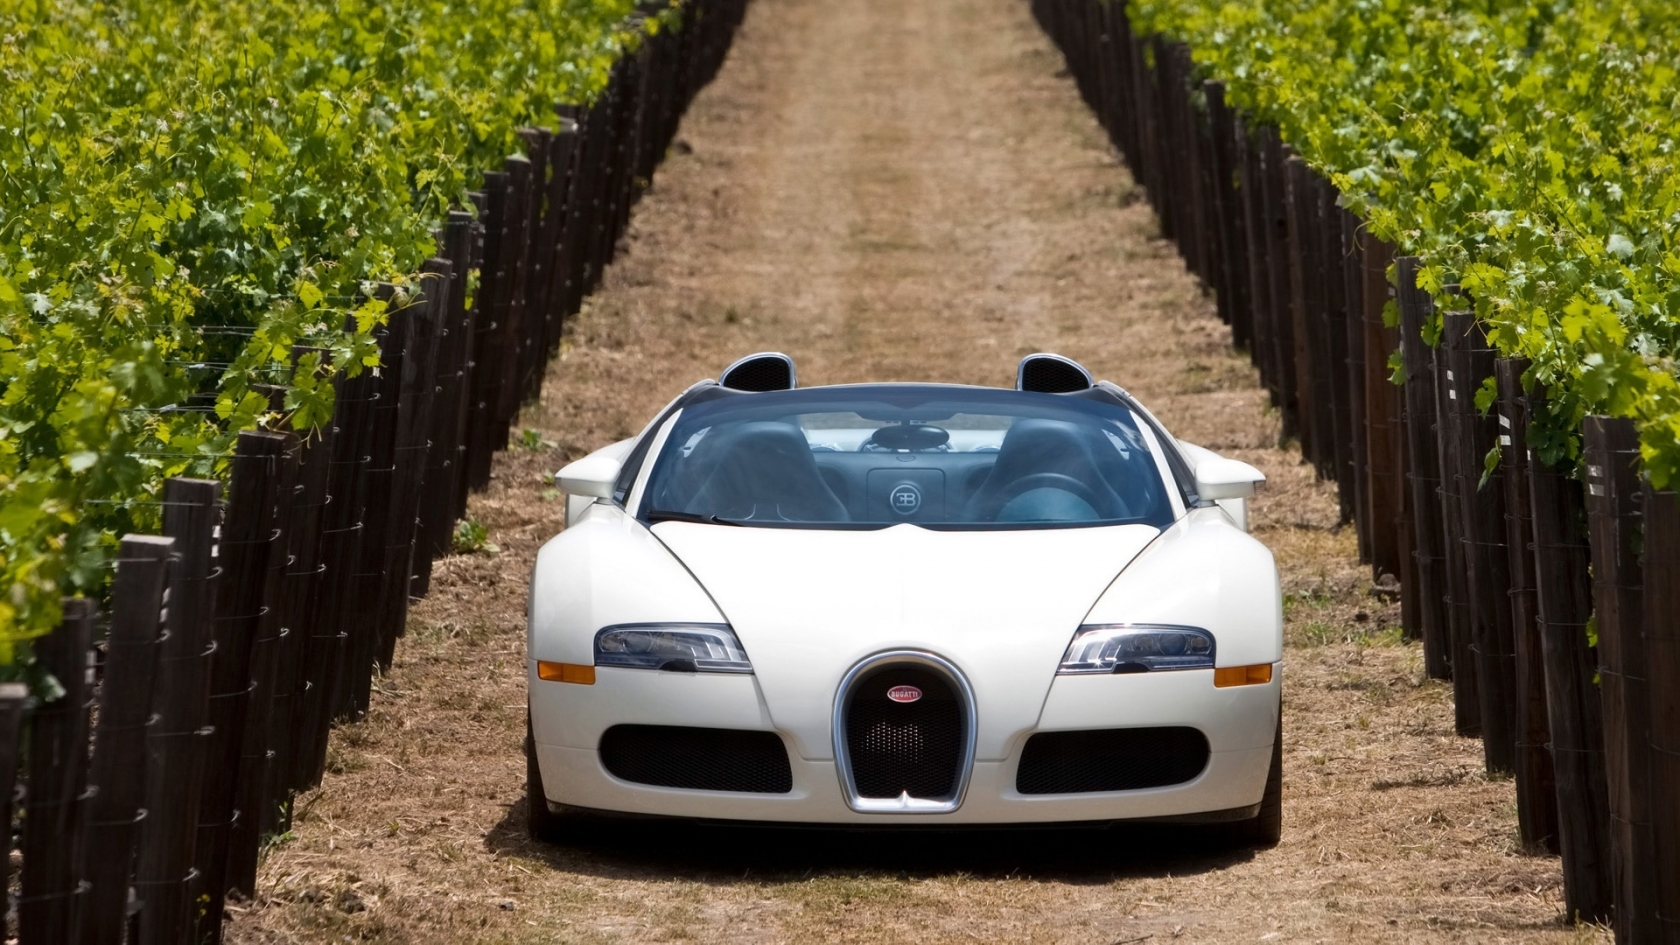 Bugatti Veyron 16.4 Grand Sport 2010 in Napa Valley - Front 3 for 1680 x 945 HDTV resolution